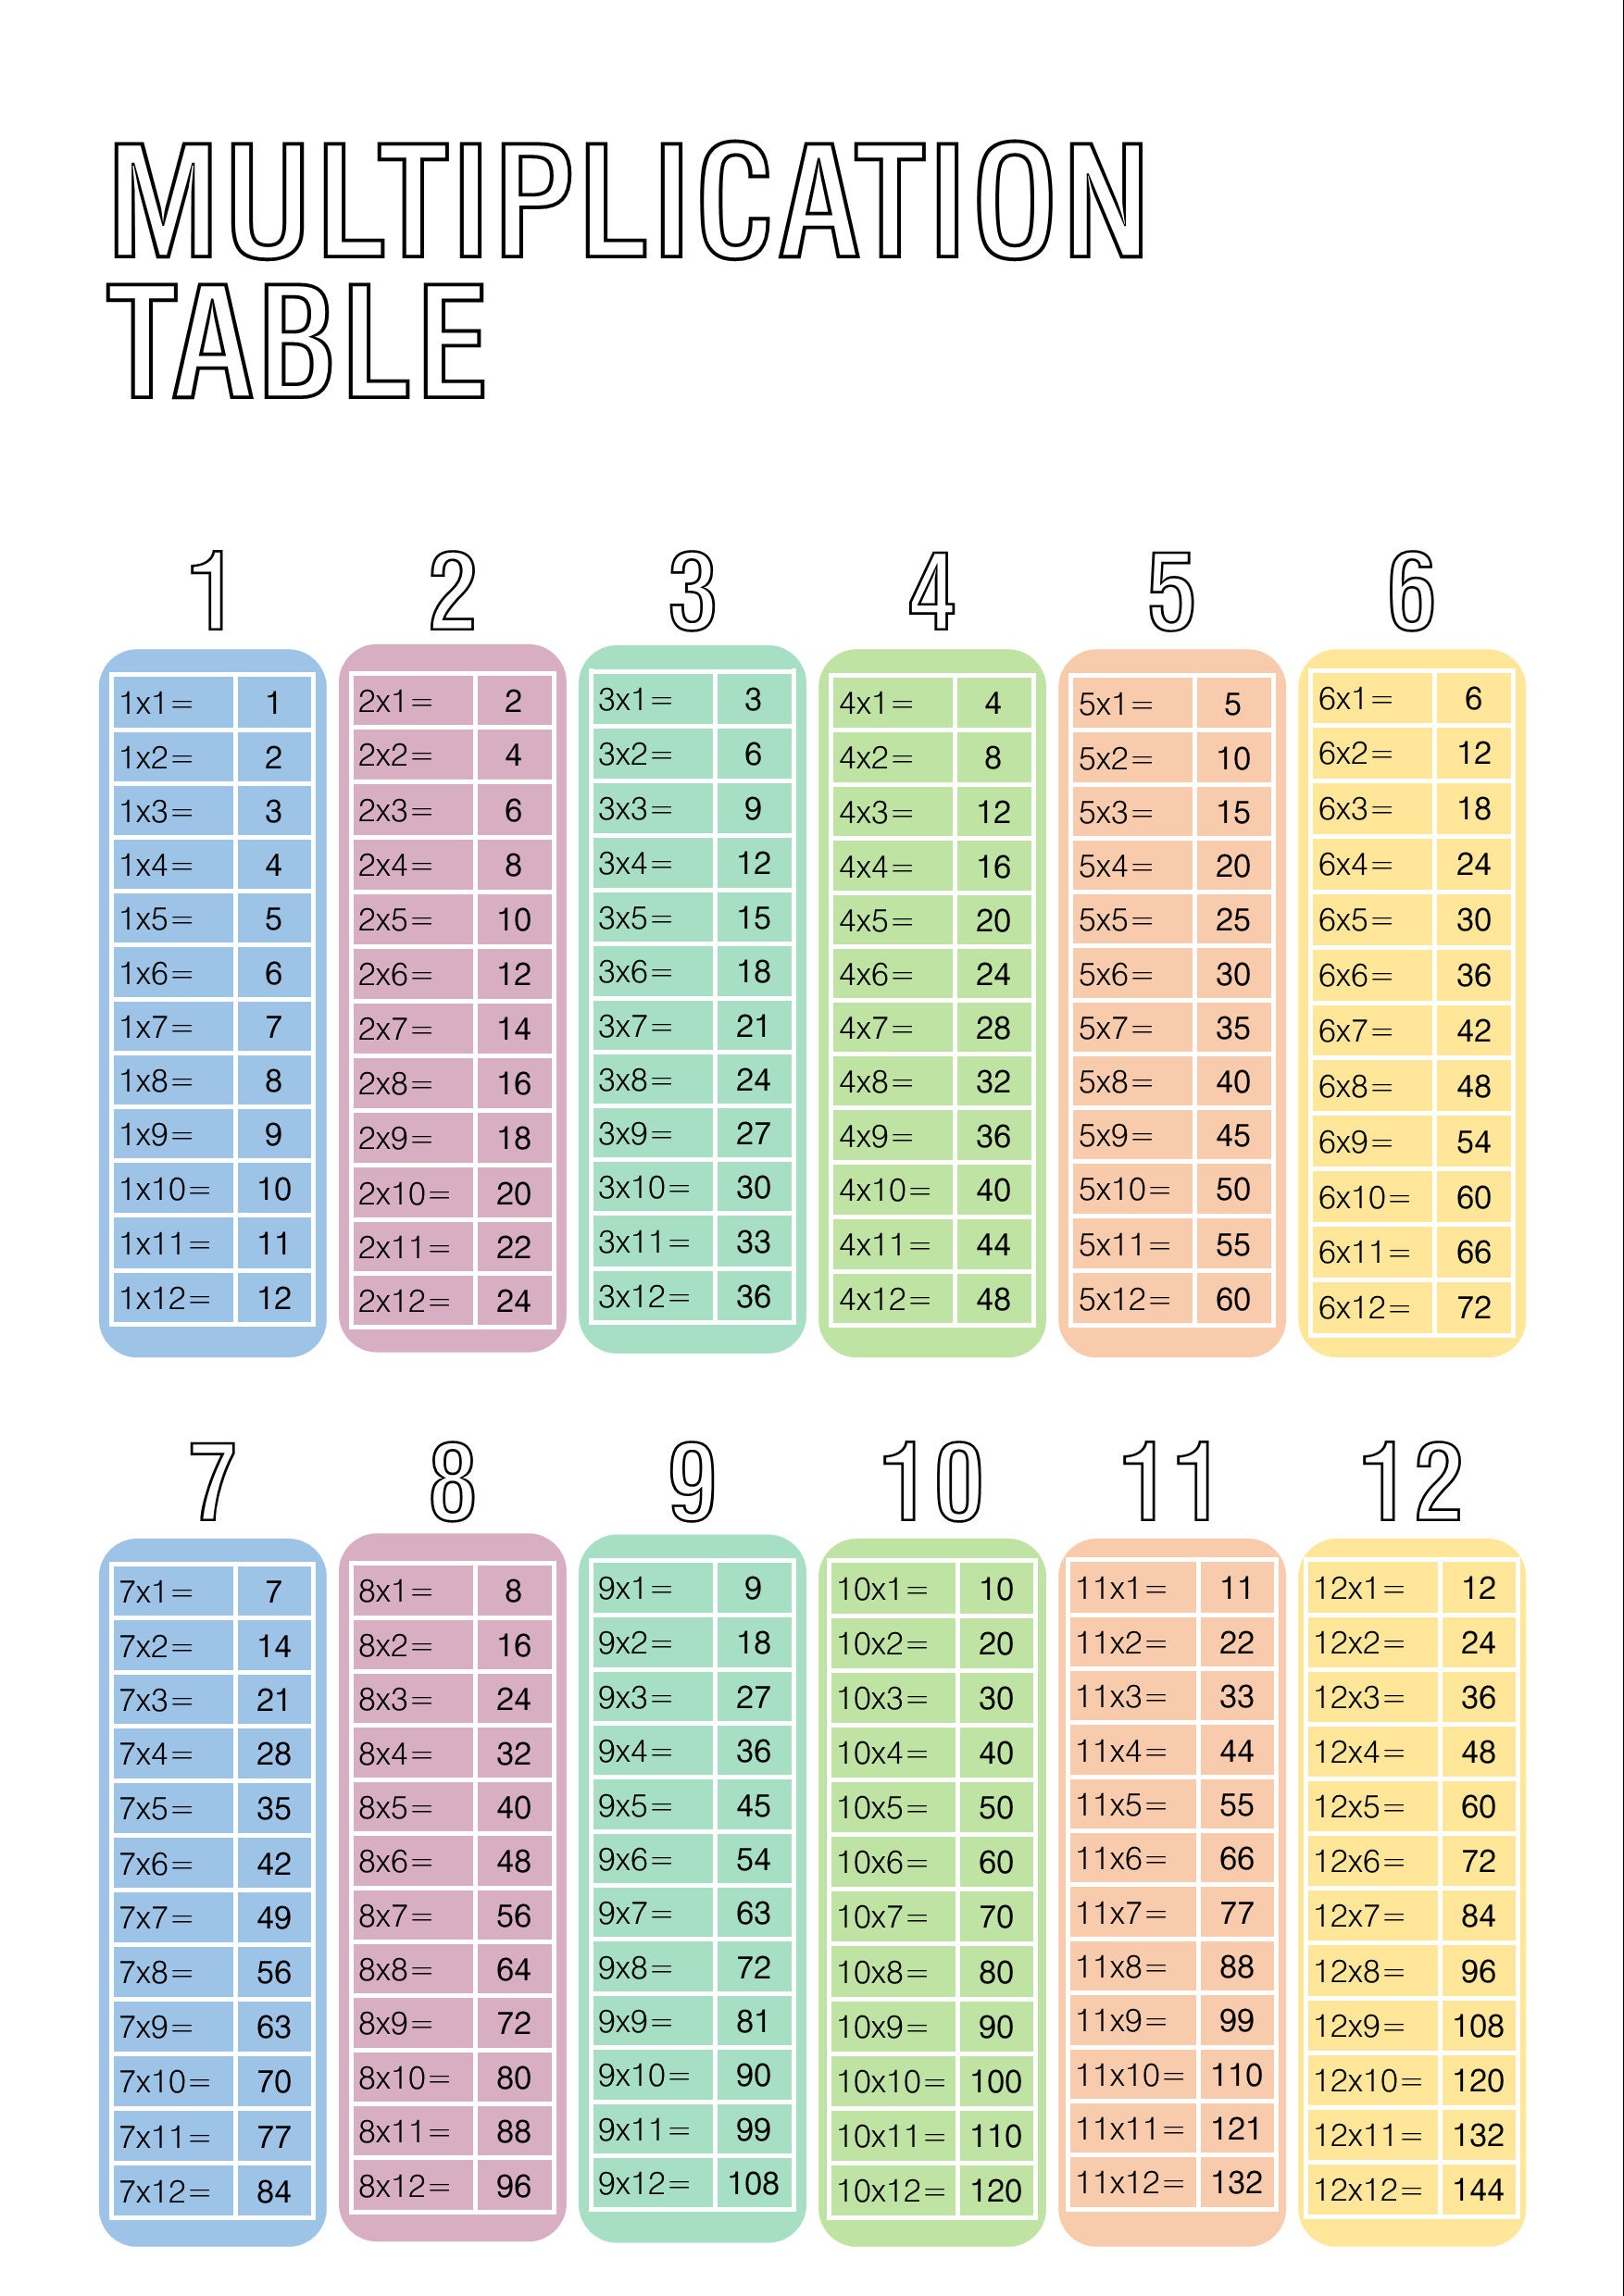 Multiplication Table Fill in the Blank, Times Table Poster, At home  learning, Primary School materials Bundle Printable